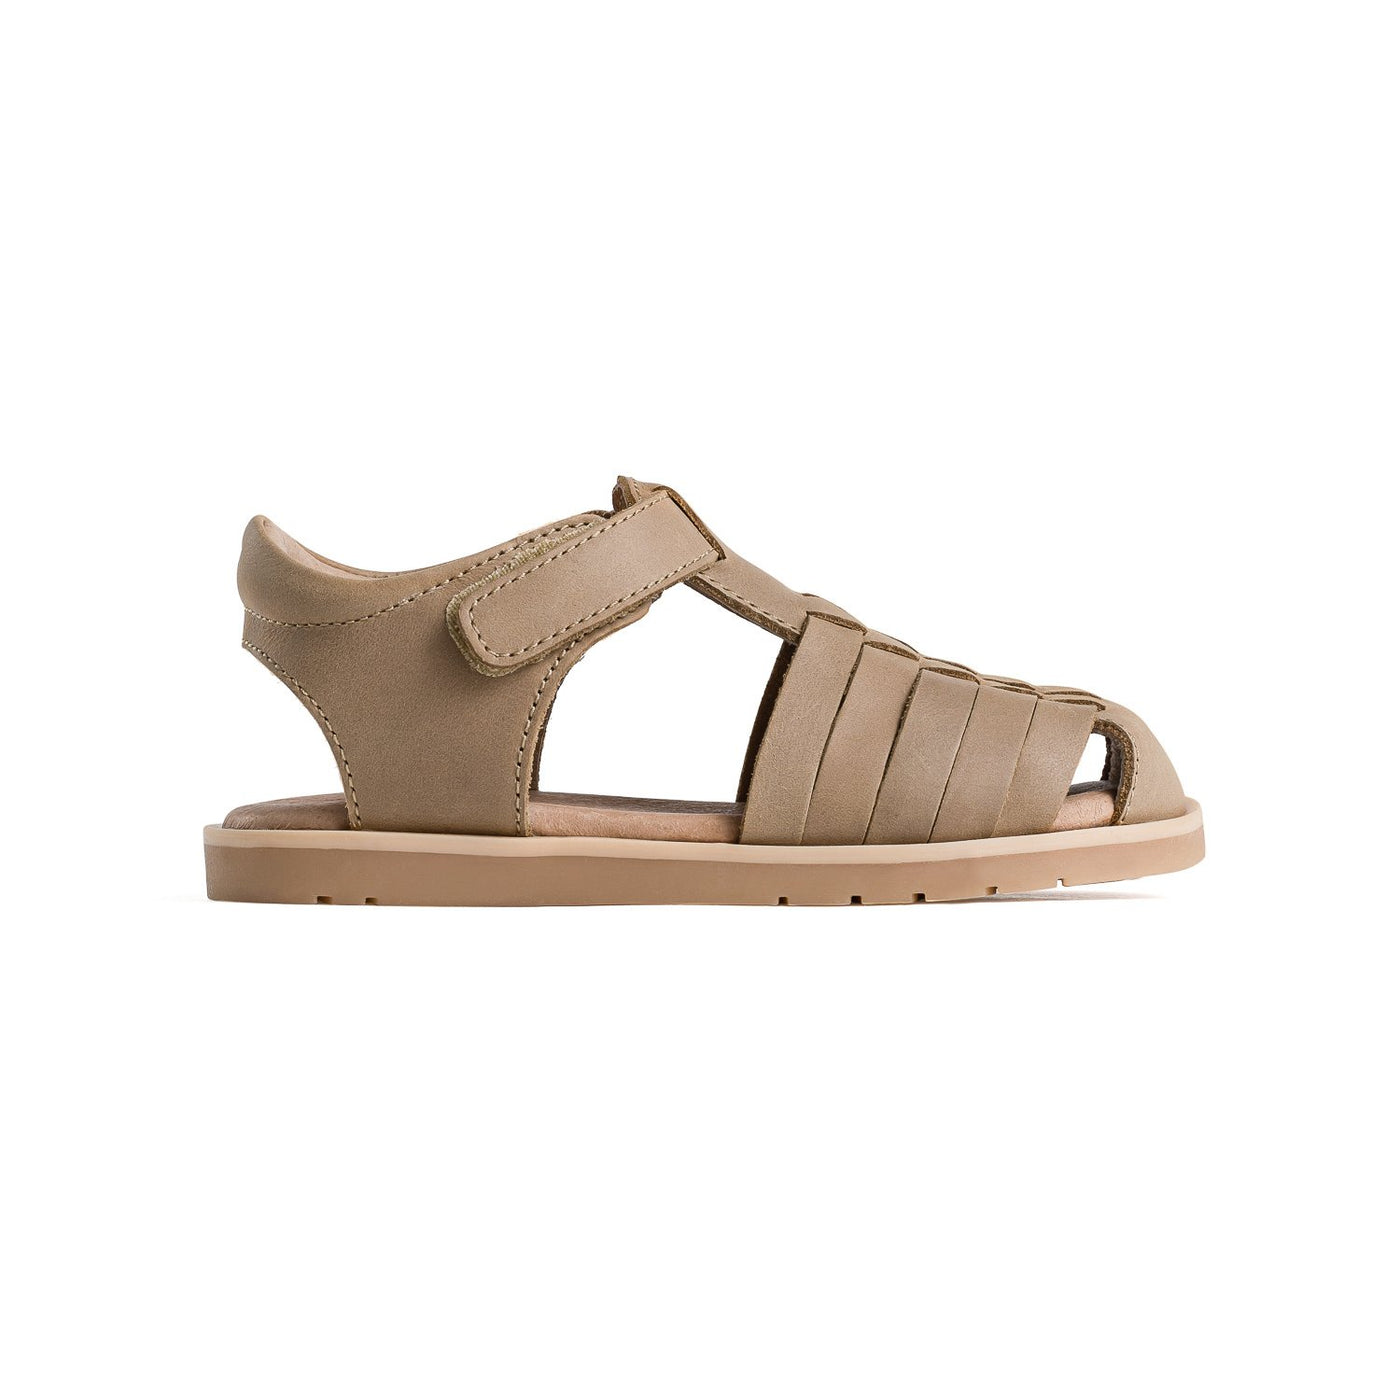 Side view of Frankie sandals in colour Tan